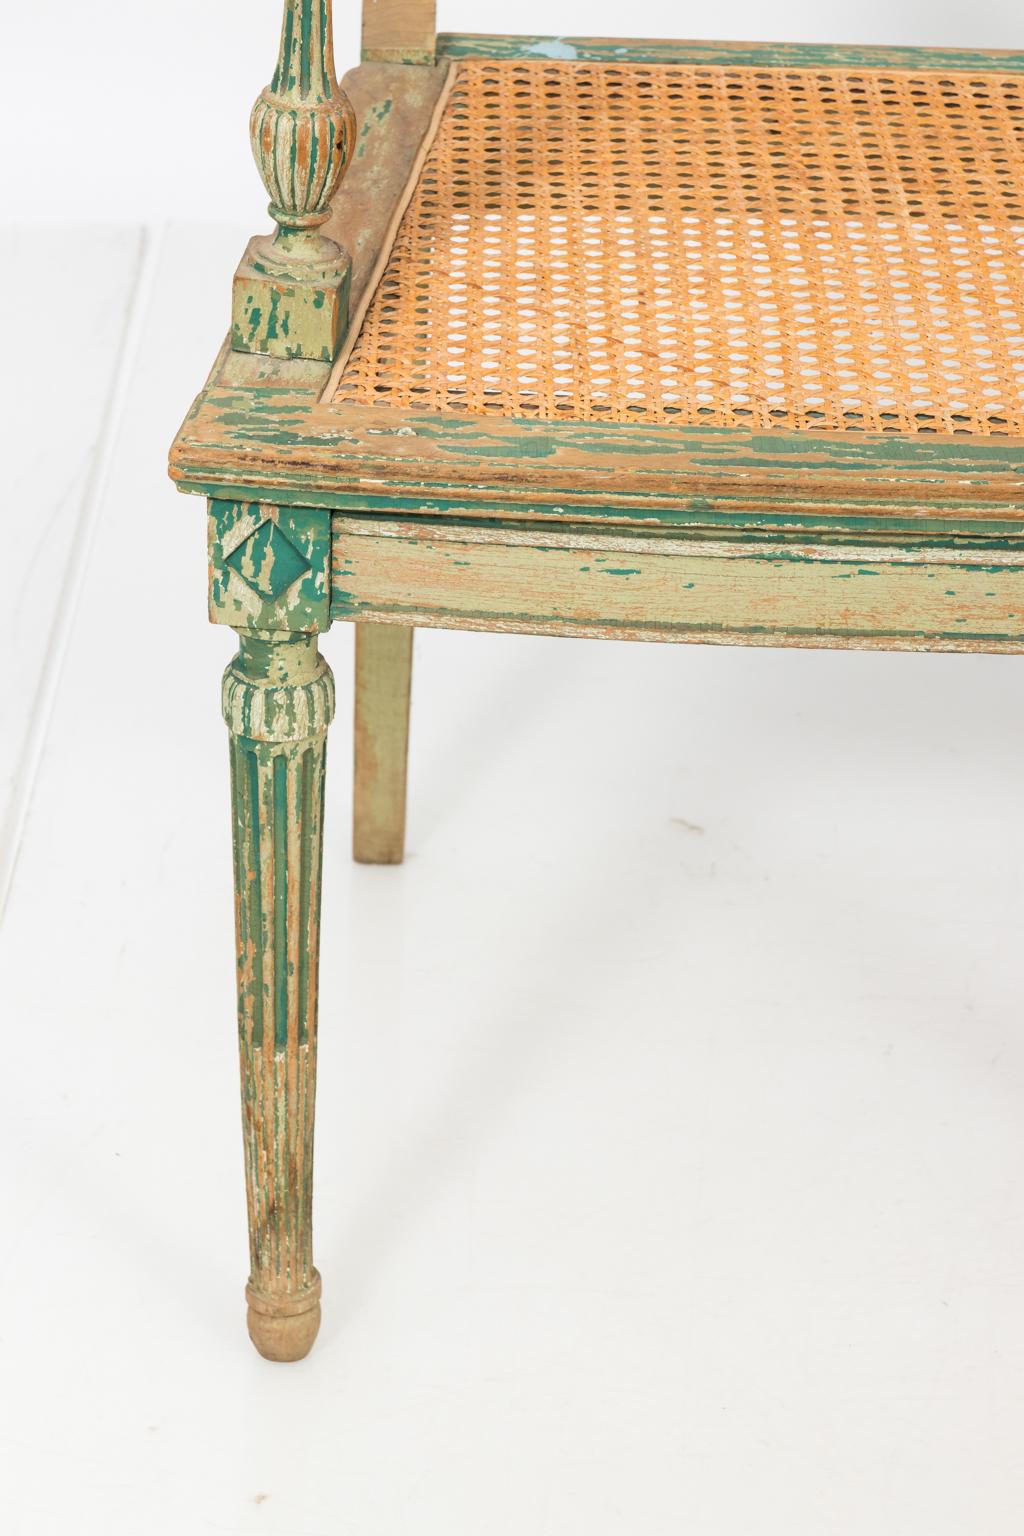 Painted Late 19th Century Two-Seated French Bench